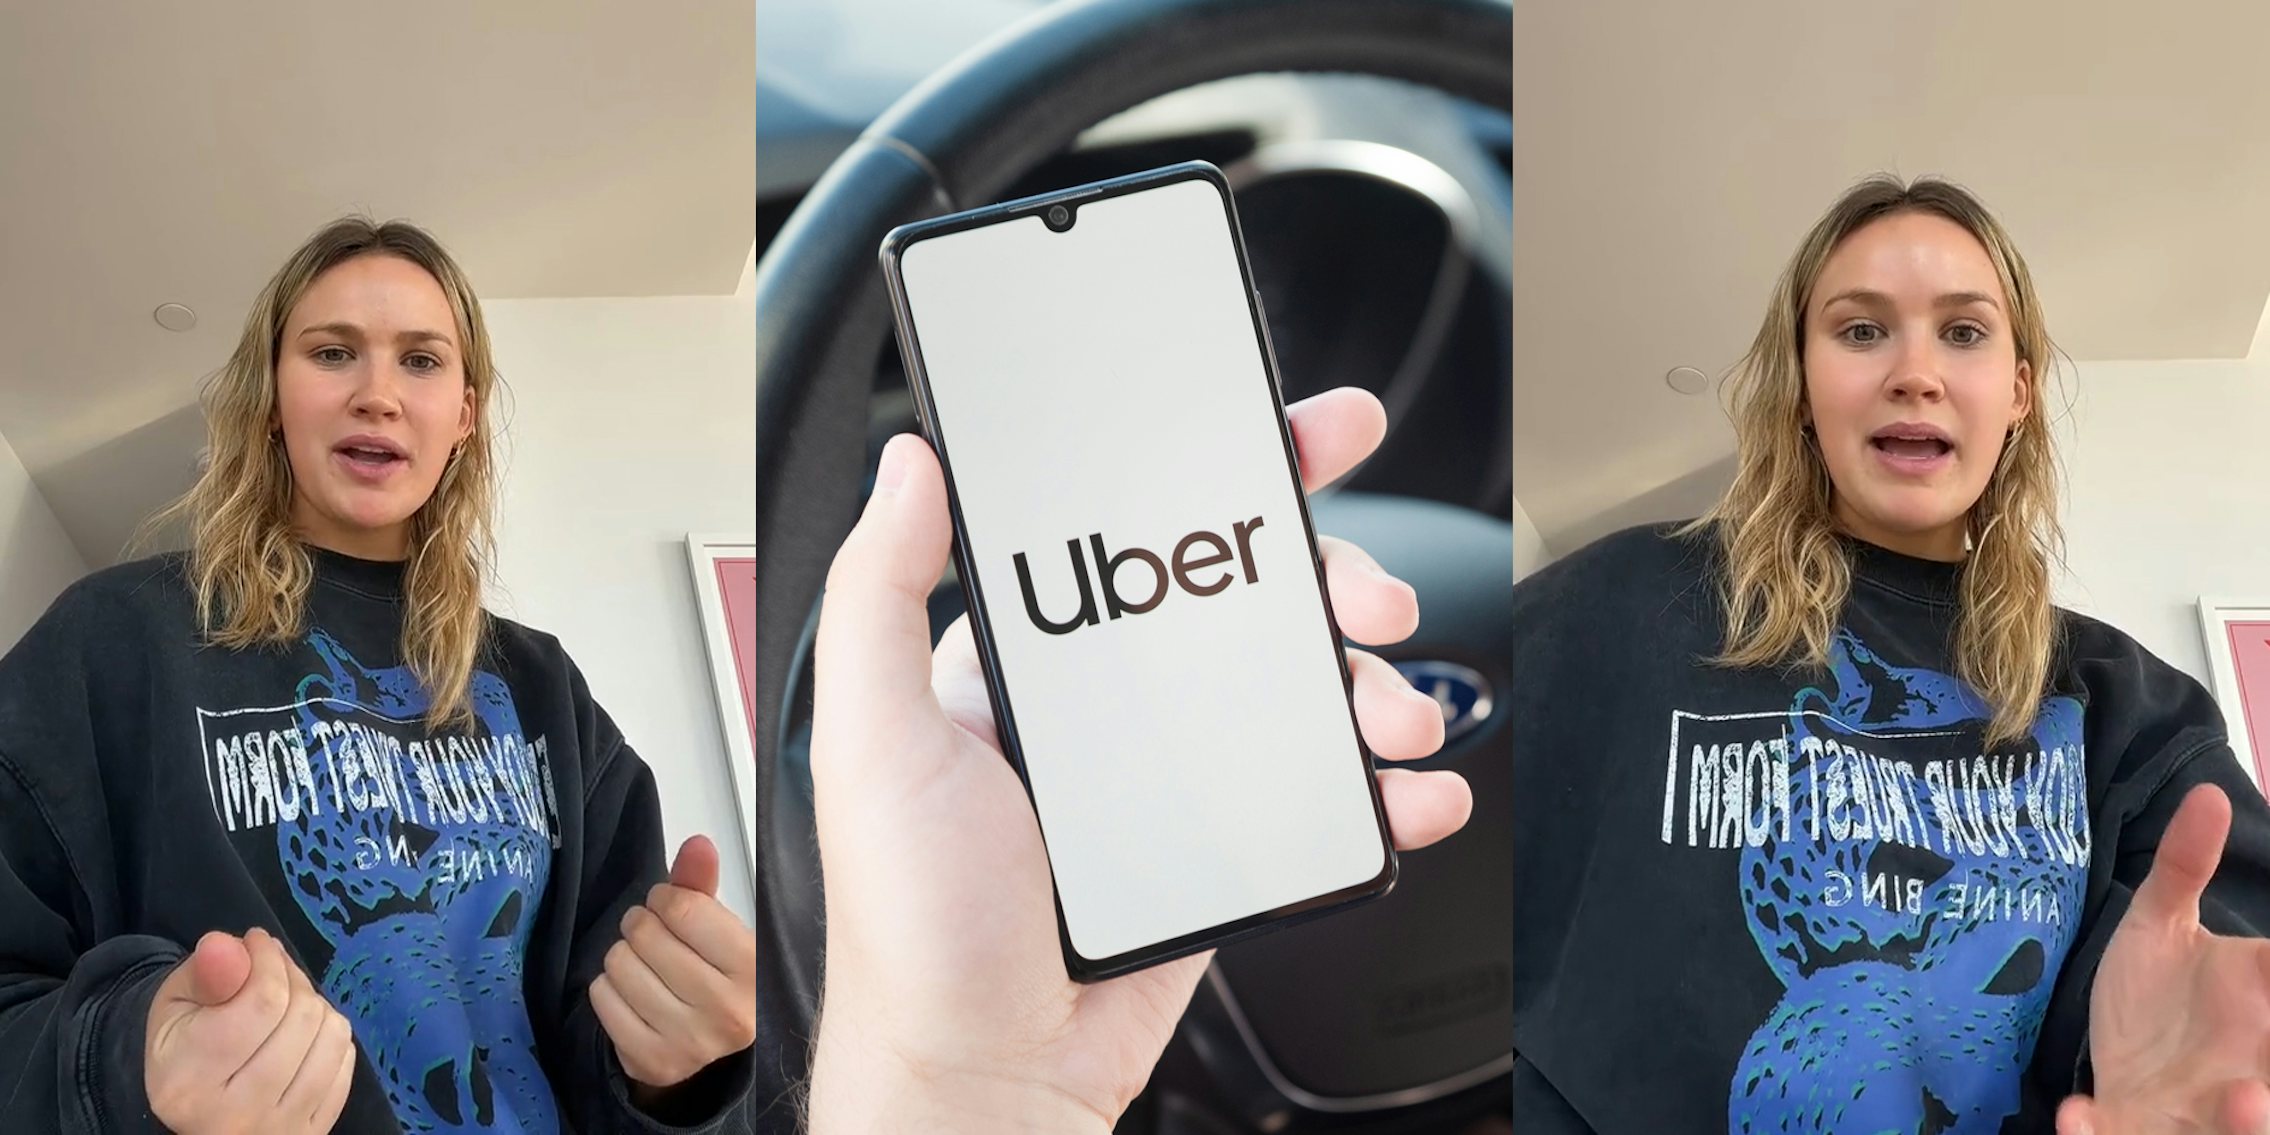 woman speaking in front of light tan walls (l) hand holding phone with Uber logo on screen in front of steering wheel in car (c) woman speaking in front of light tan walls (r)